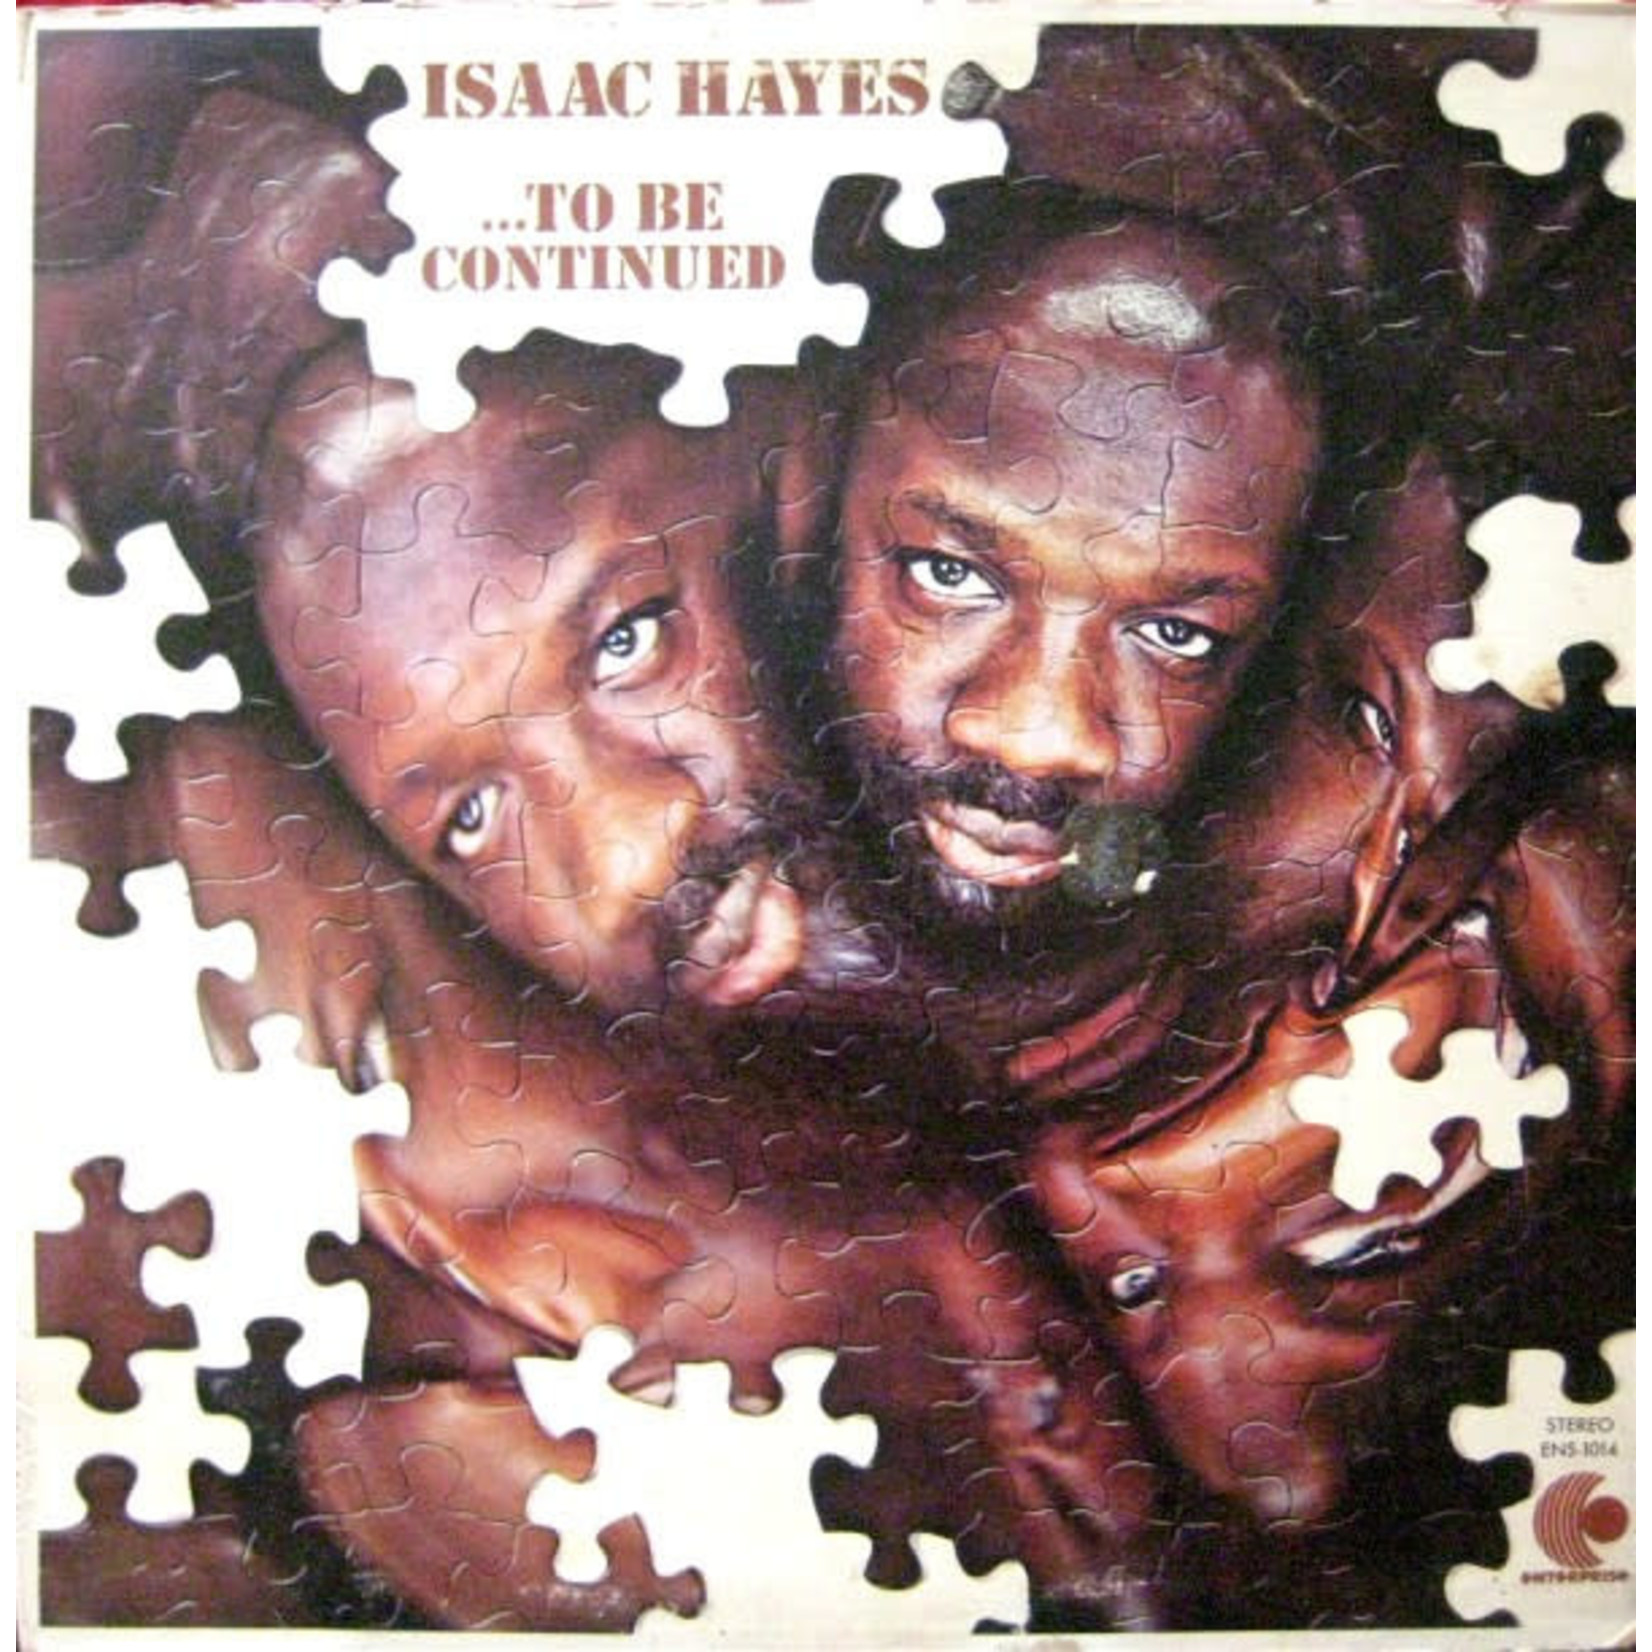 [Vintage] Isaac Hayes - To Be Continued